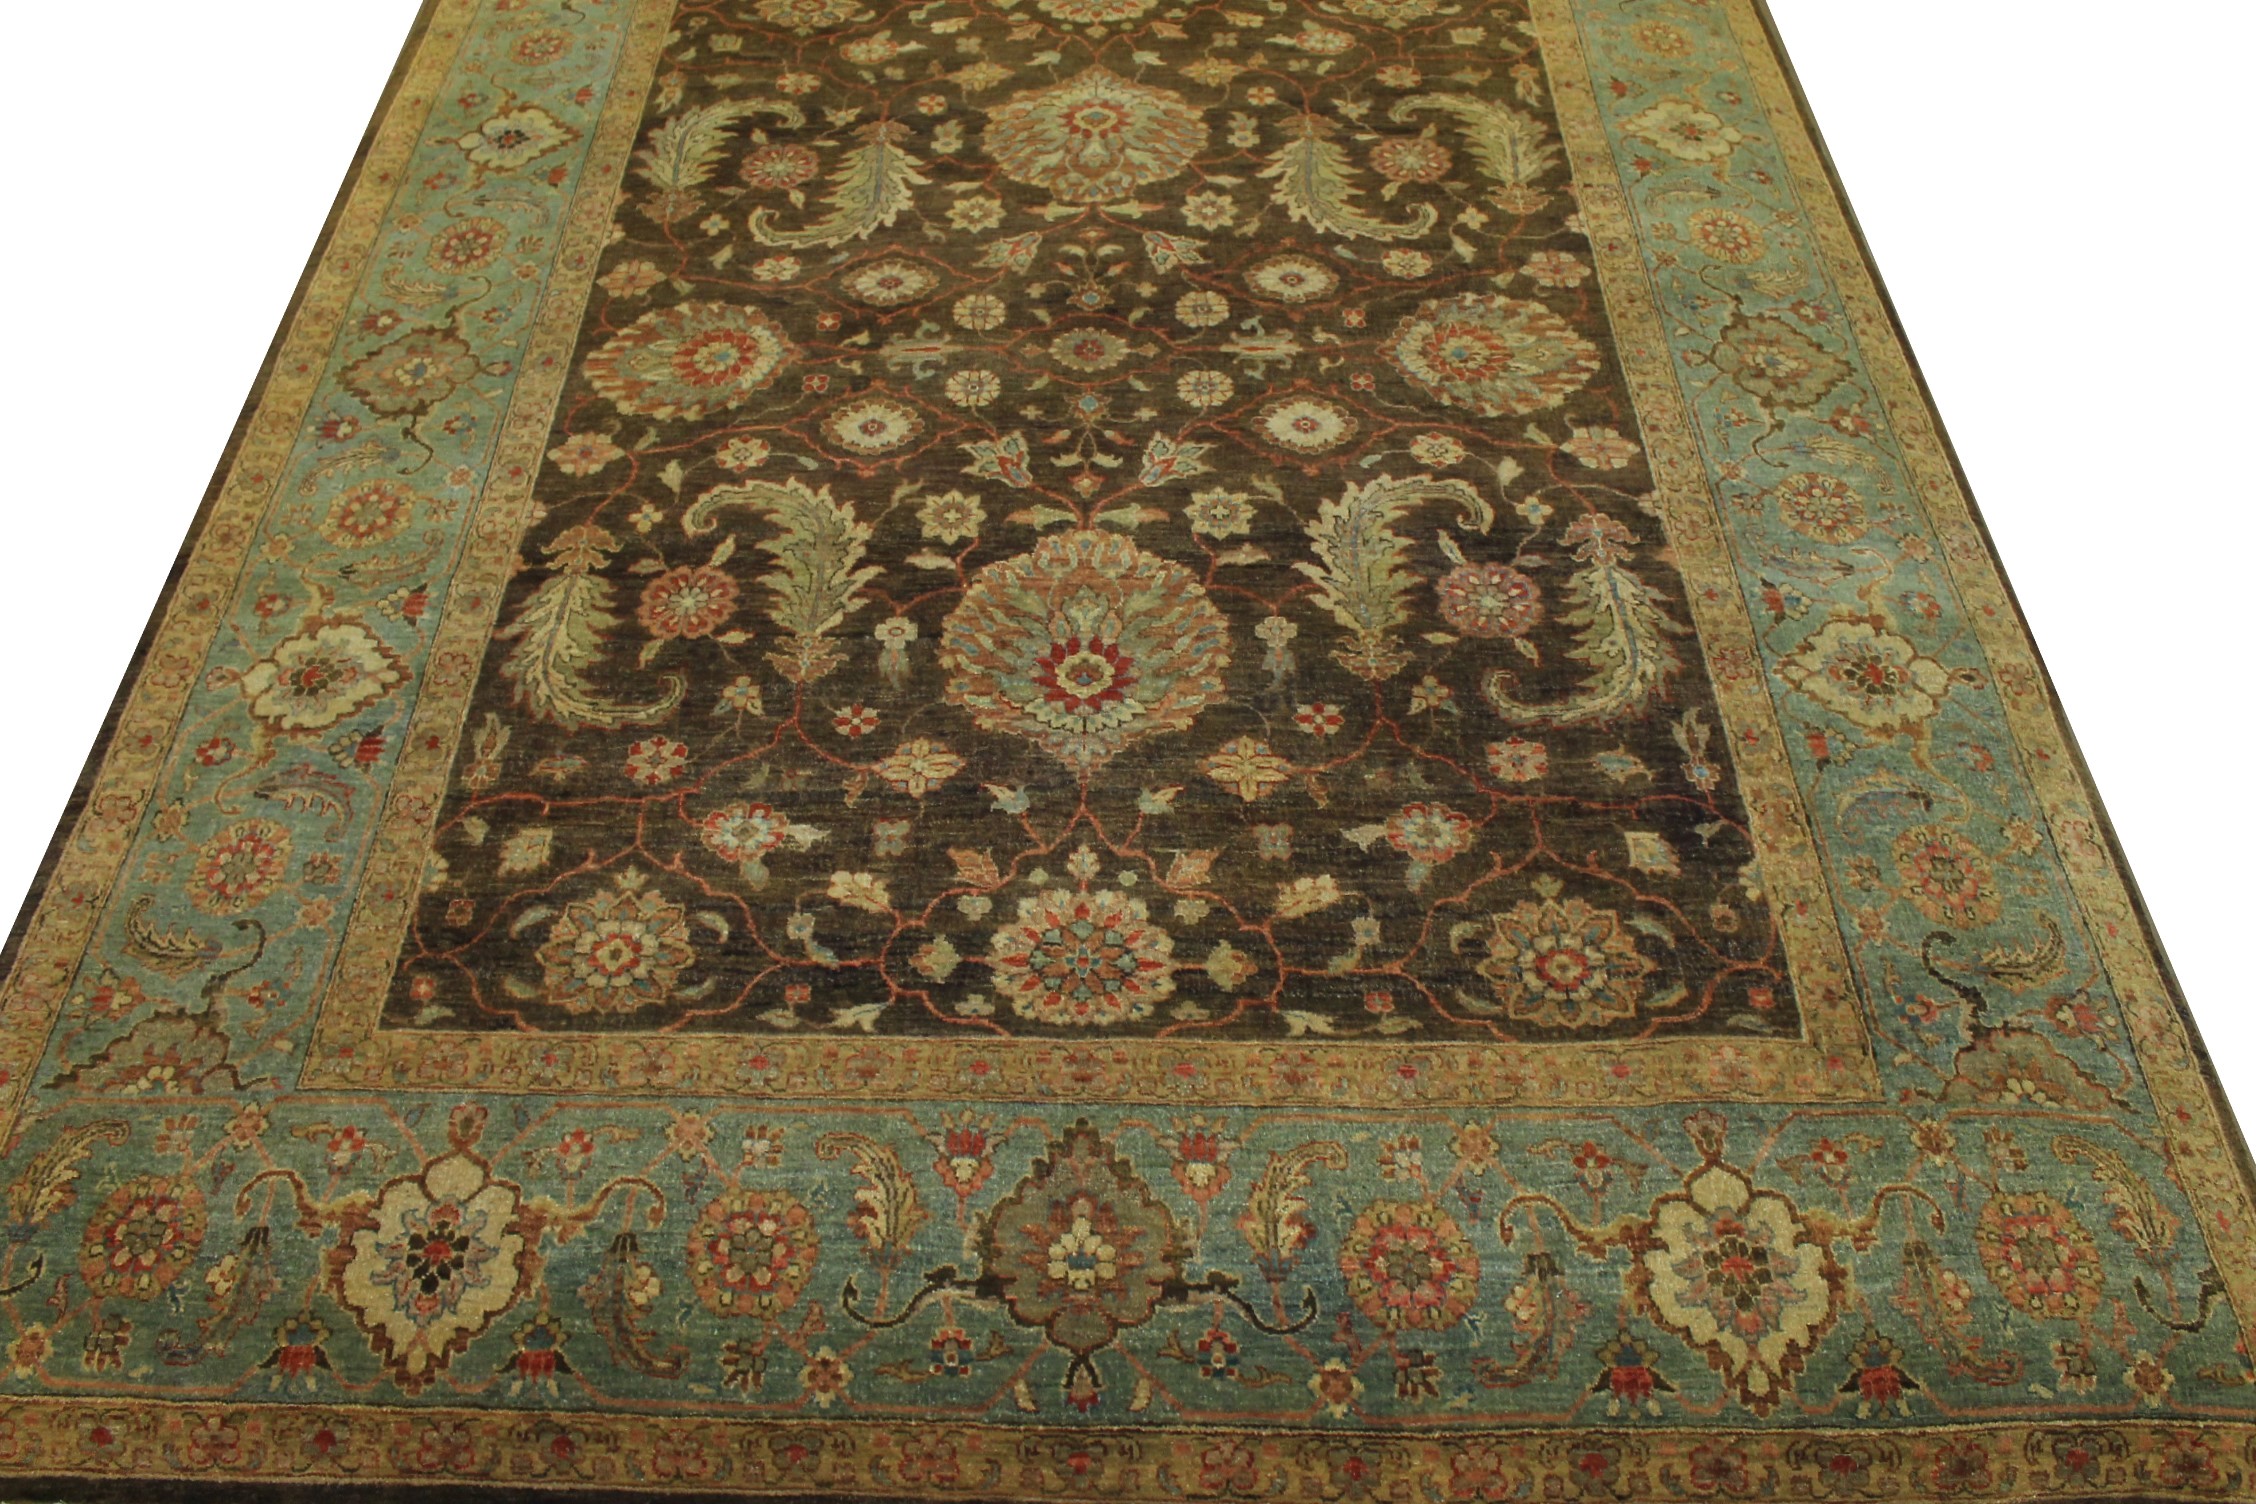 8x10 Antique Revival Hand Knotted Wool Area Rug - MR12345